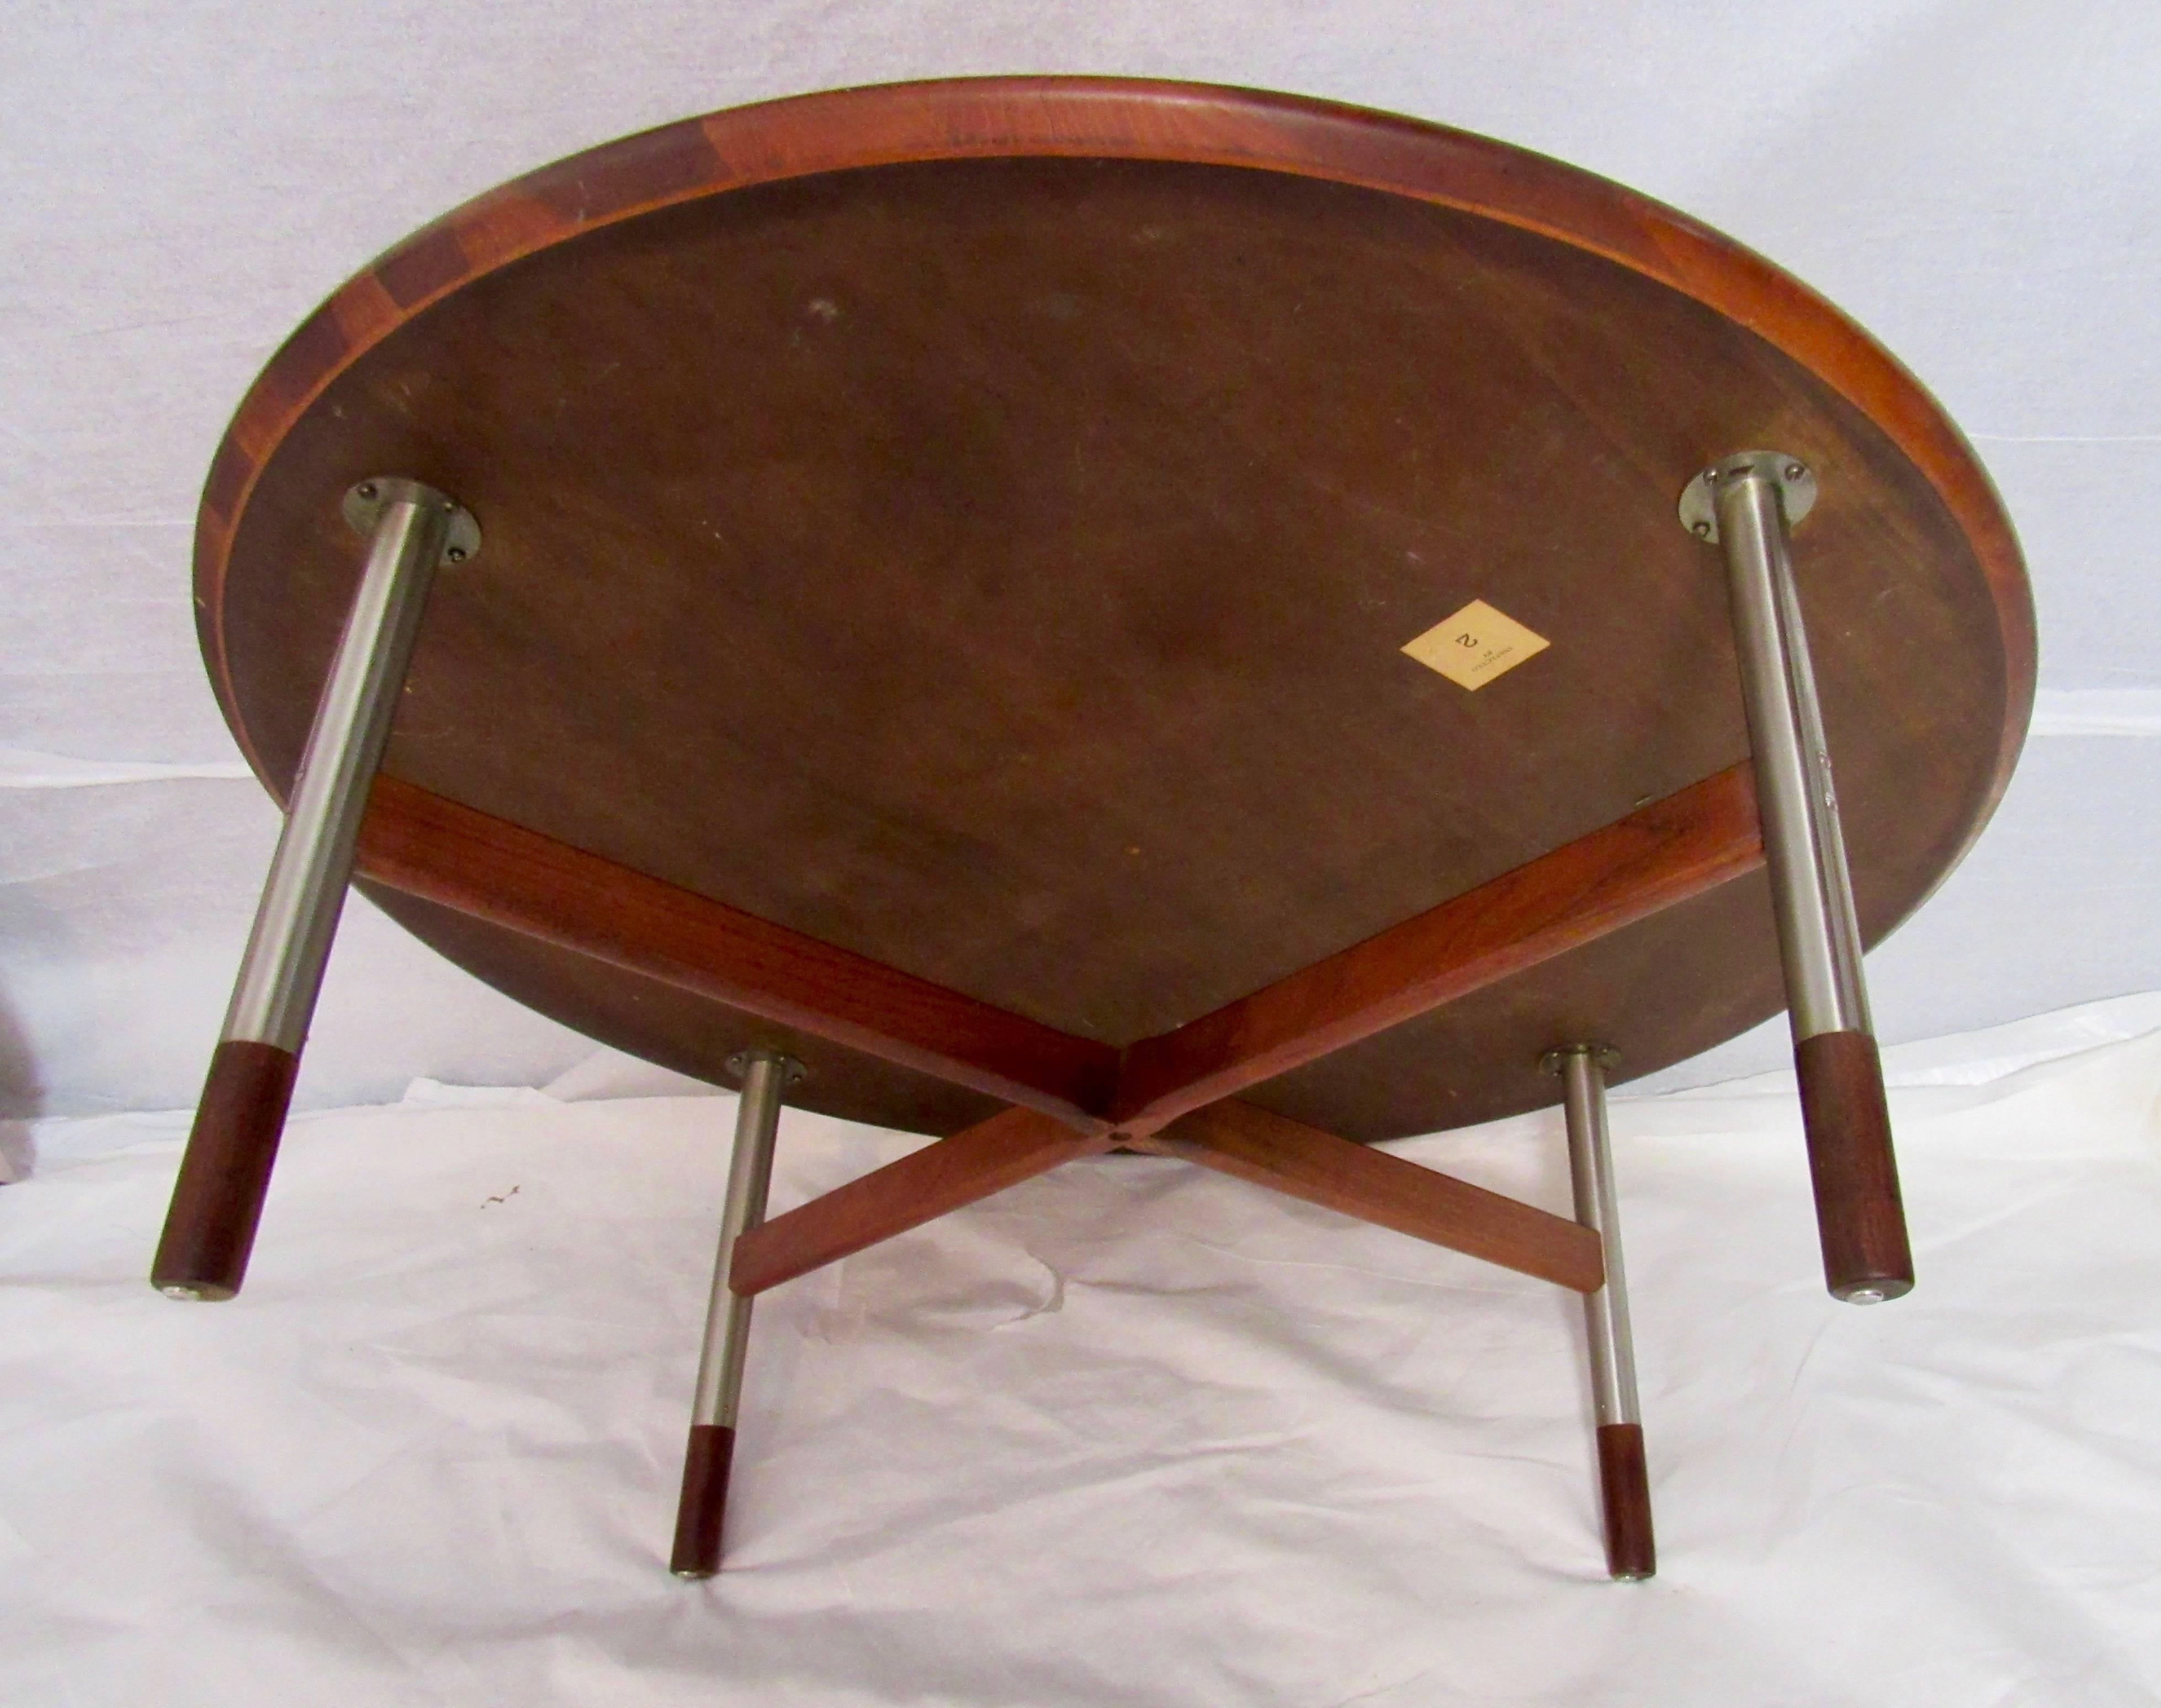 Jack Cartwright Walnut and Steel Coffee Table for Founders Furniture C. 1965 In Good Condition For Sale In Camden, ME